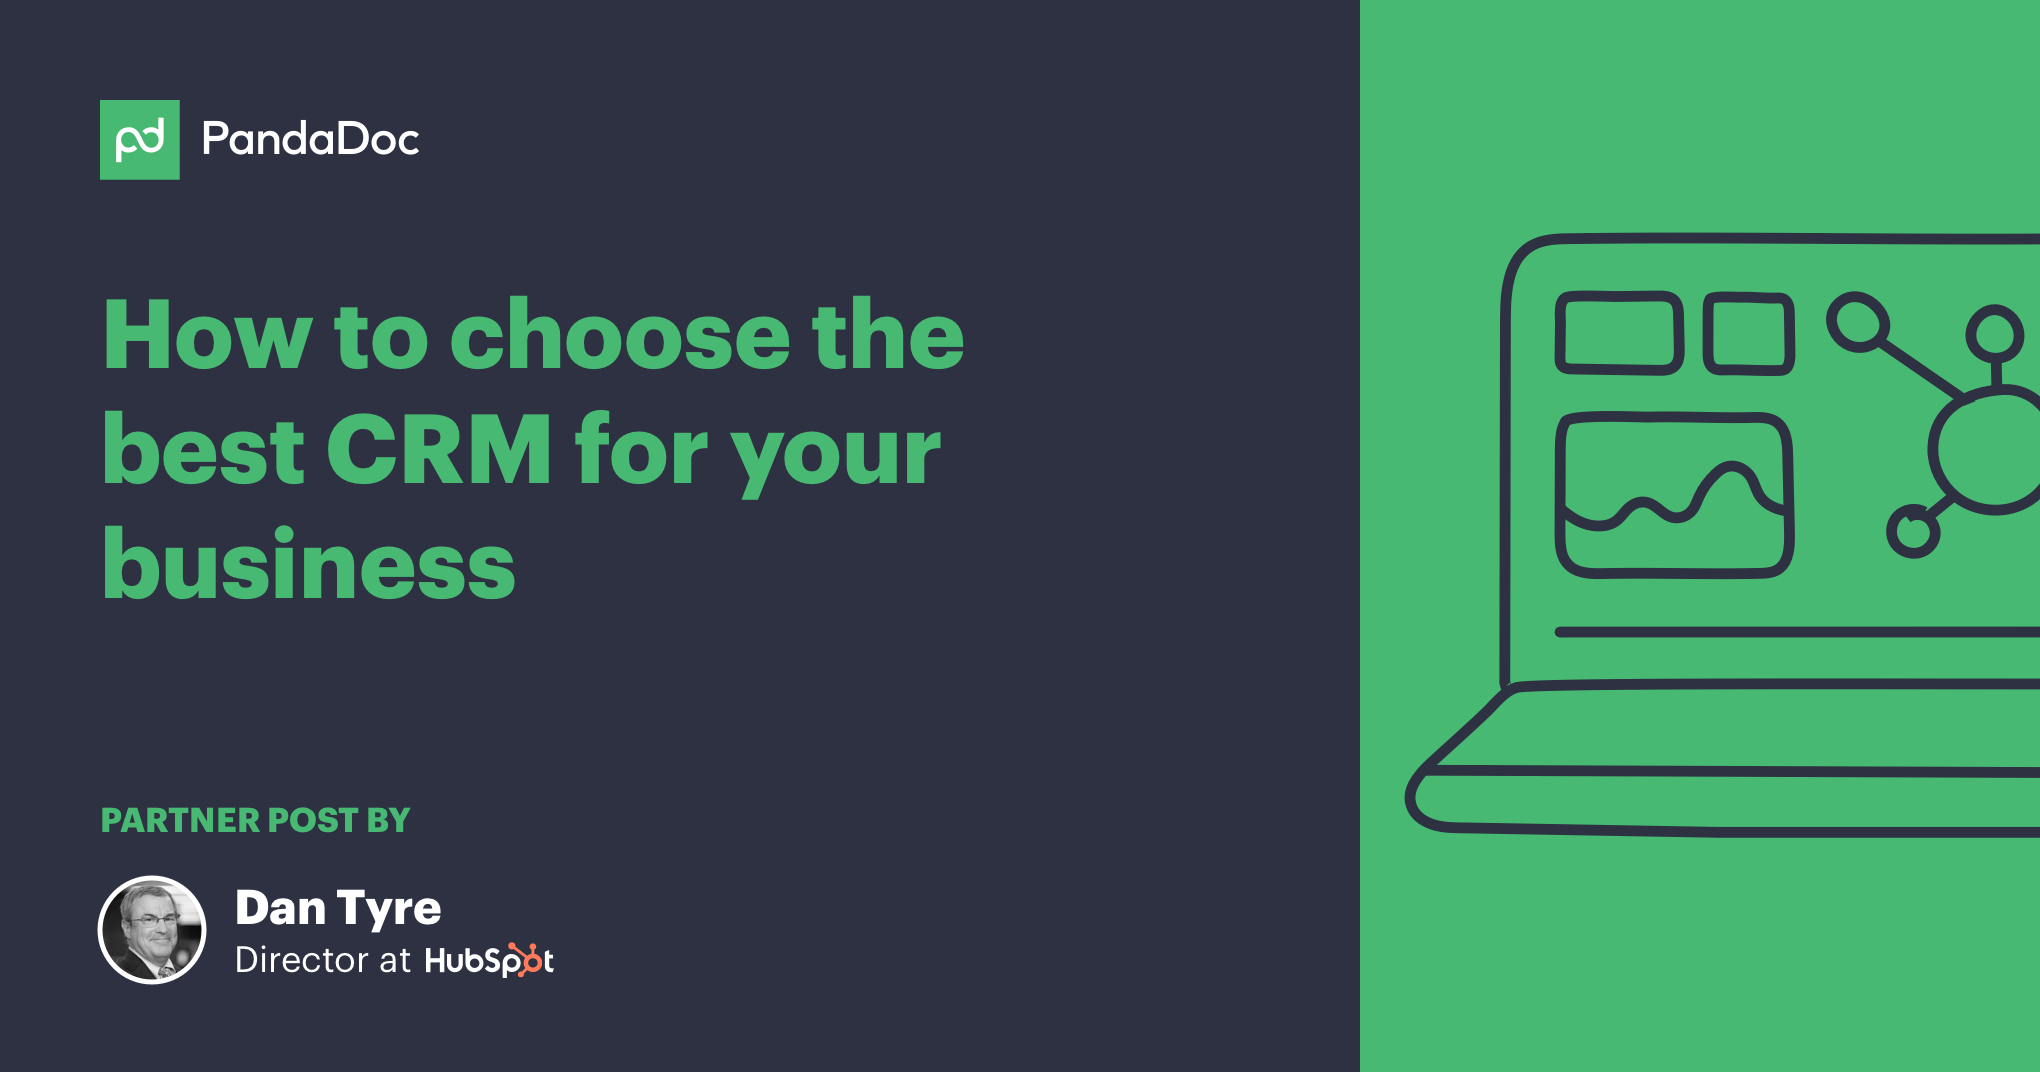 How to choose the best CRM for your business